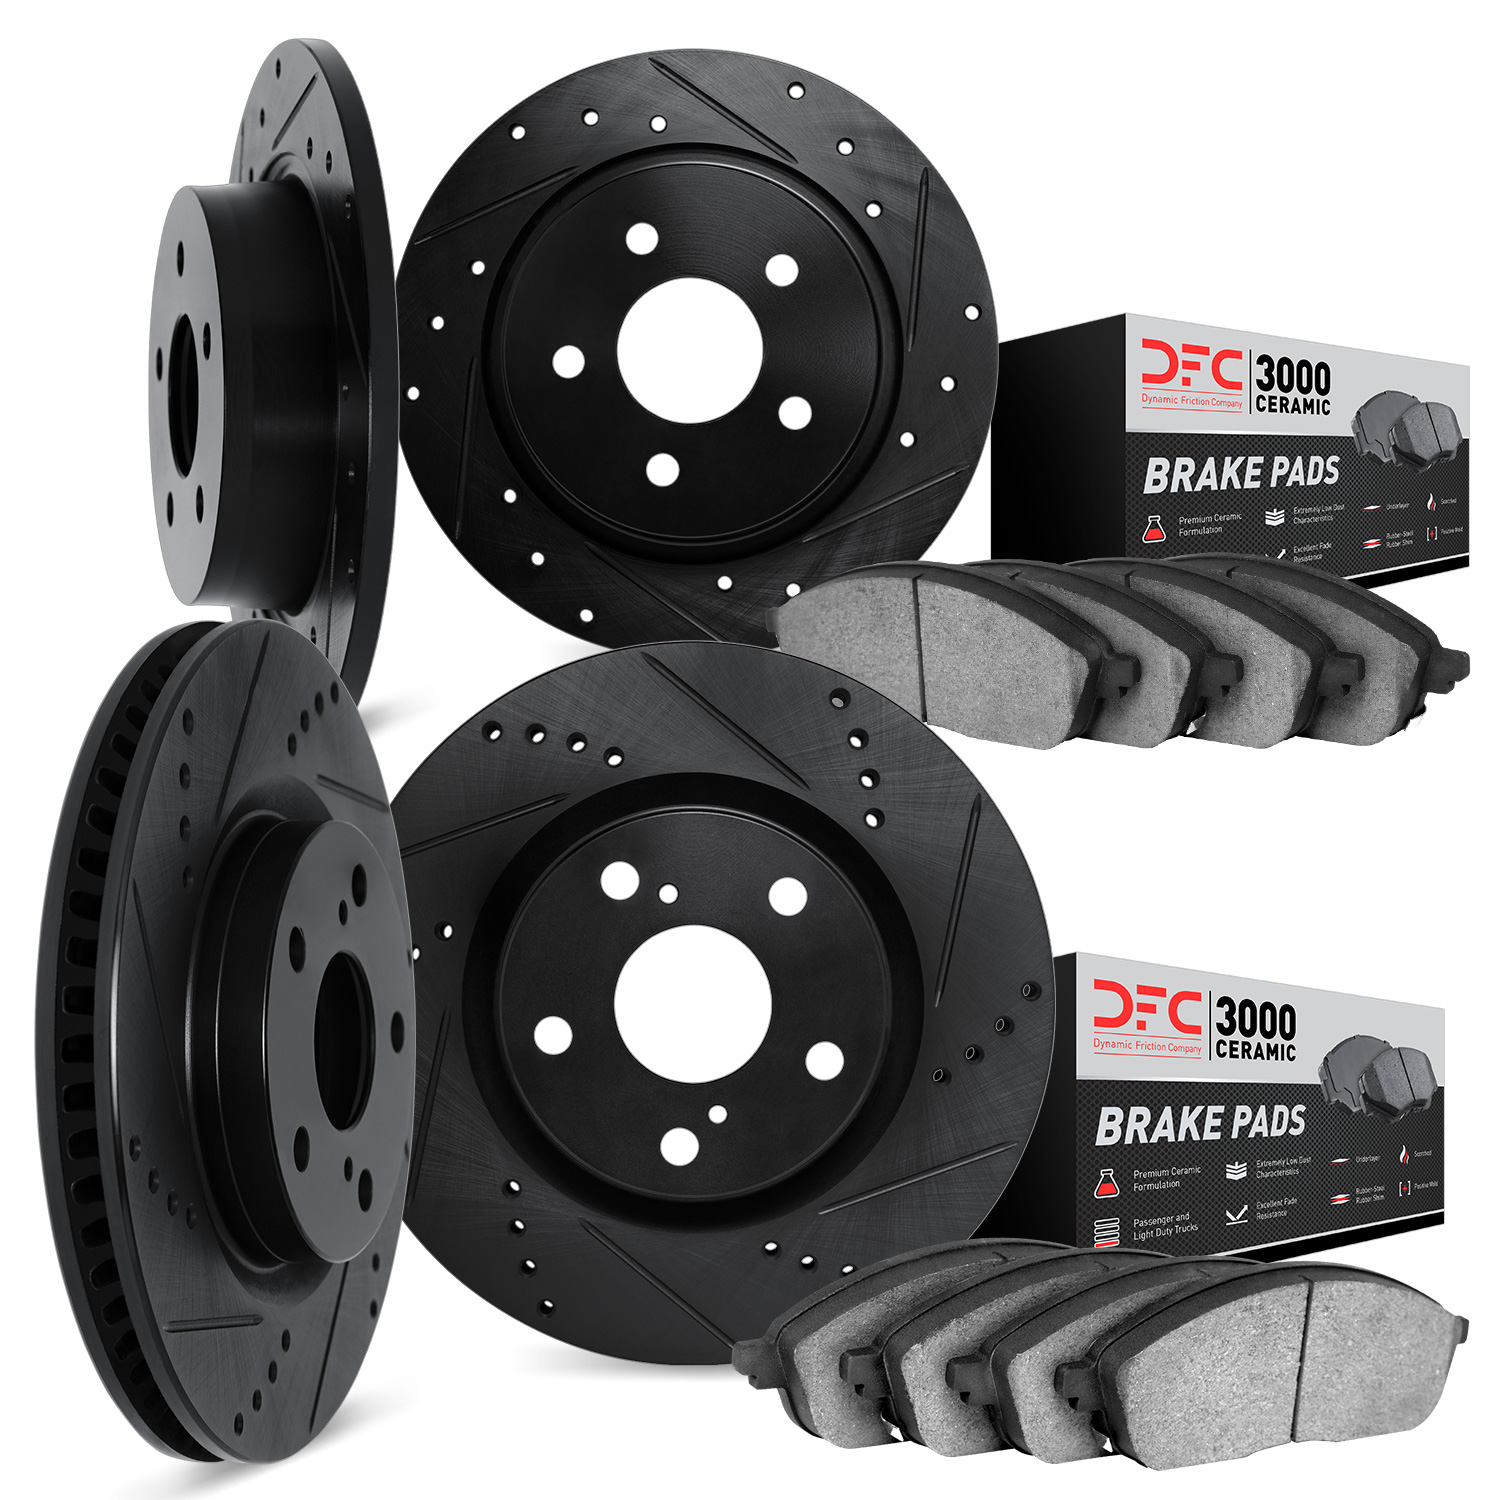 8304-59022 Drilled/Slotted Brake Rotors with 3000-Series Ceramic Brake Pads Kit [Black], 1998-2002 Acura/Honda, Position: Front